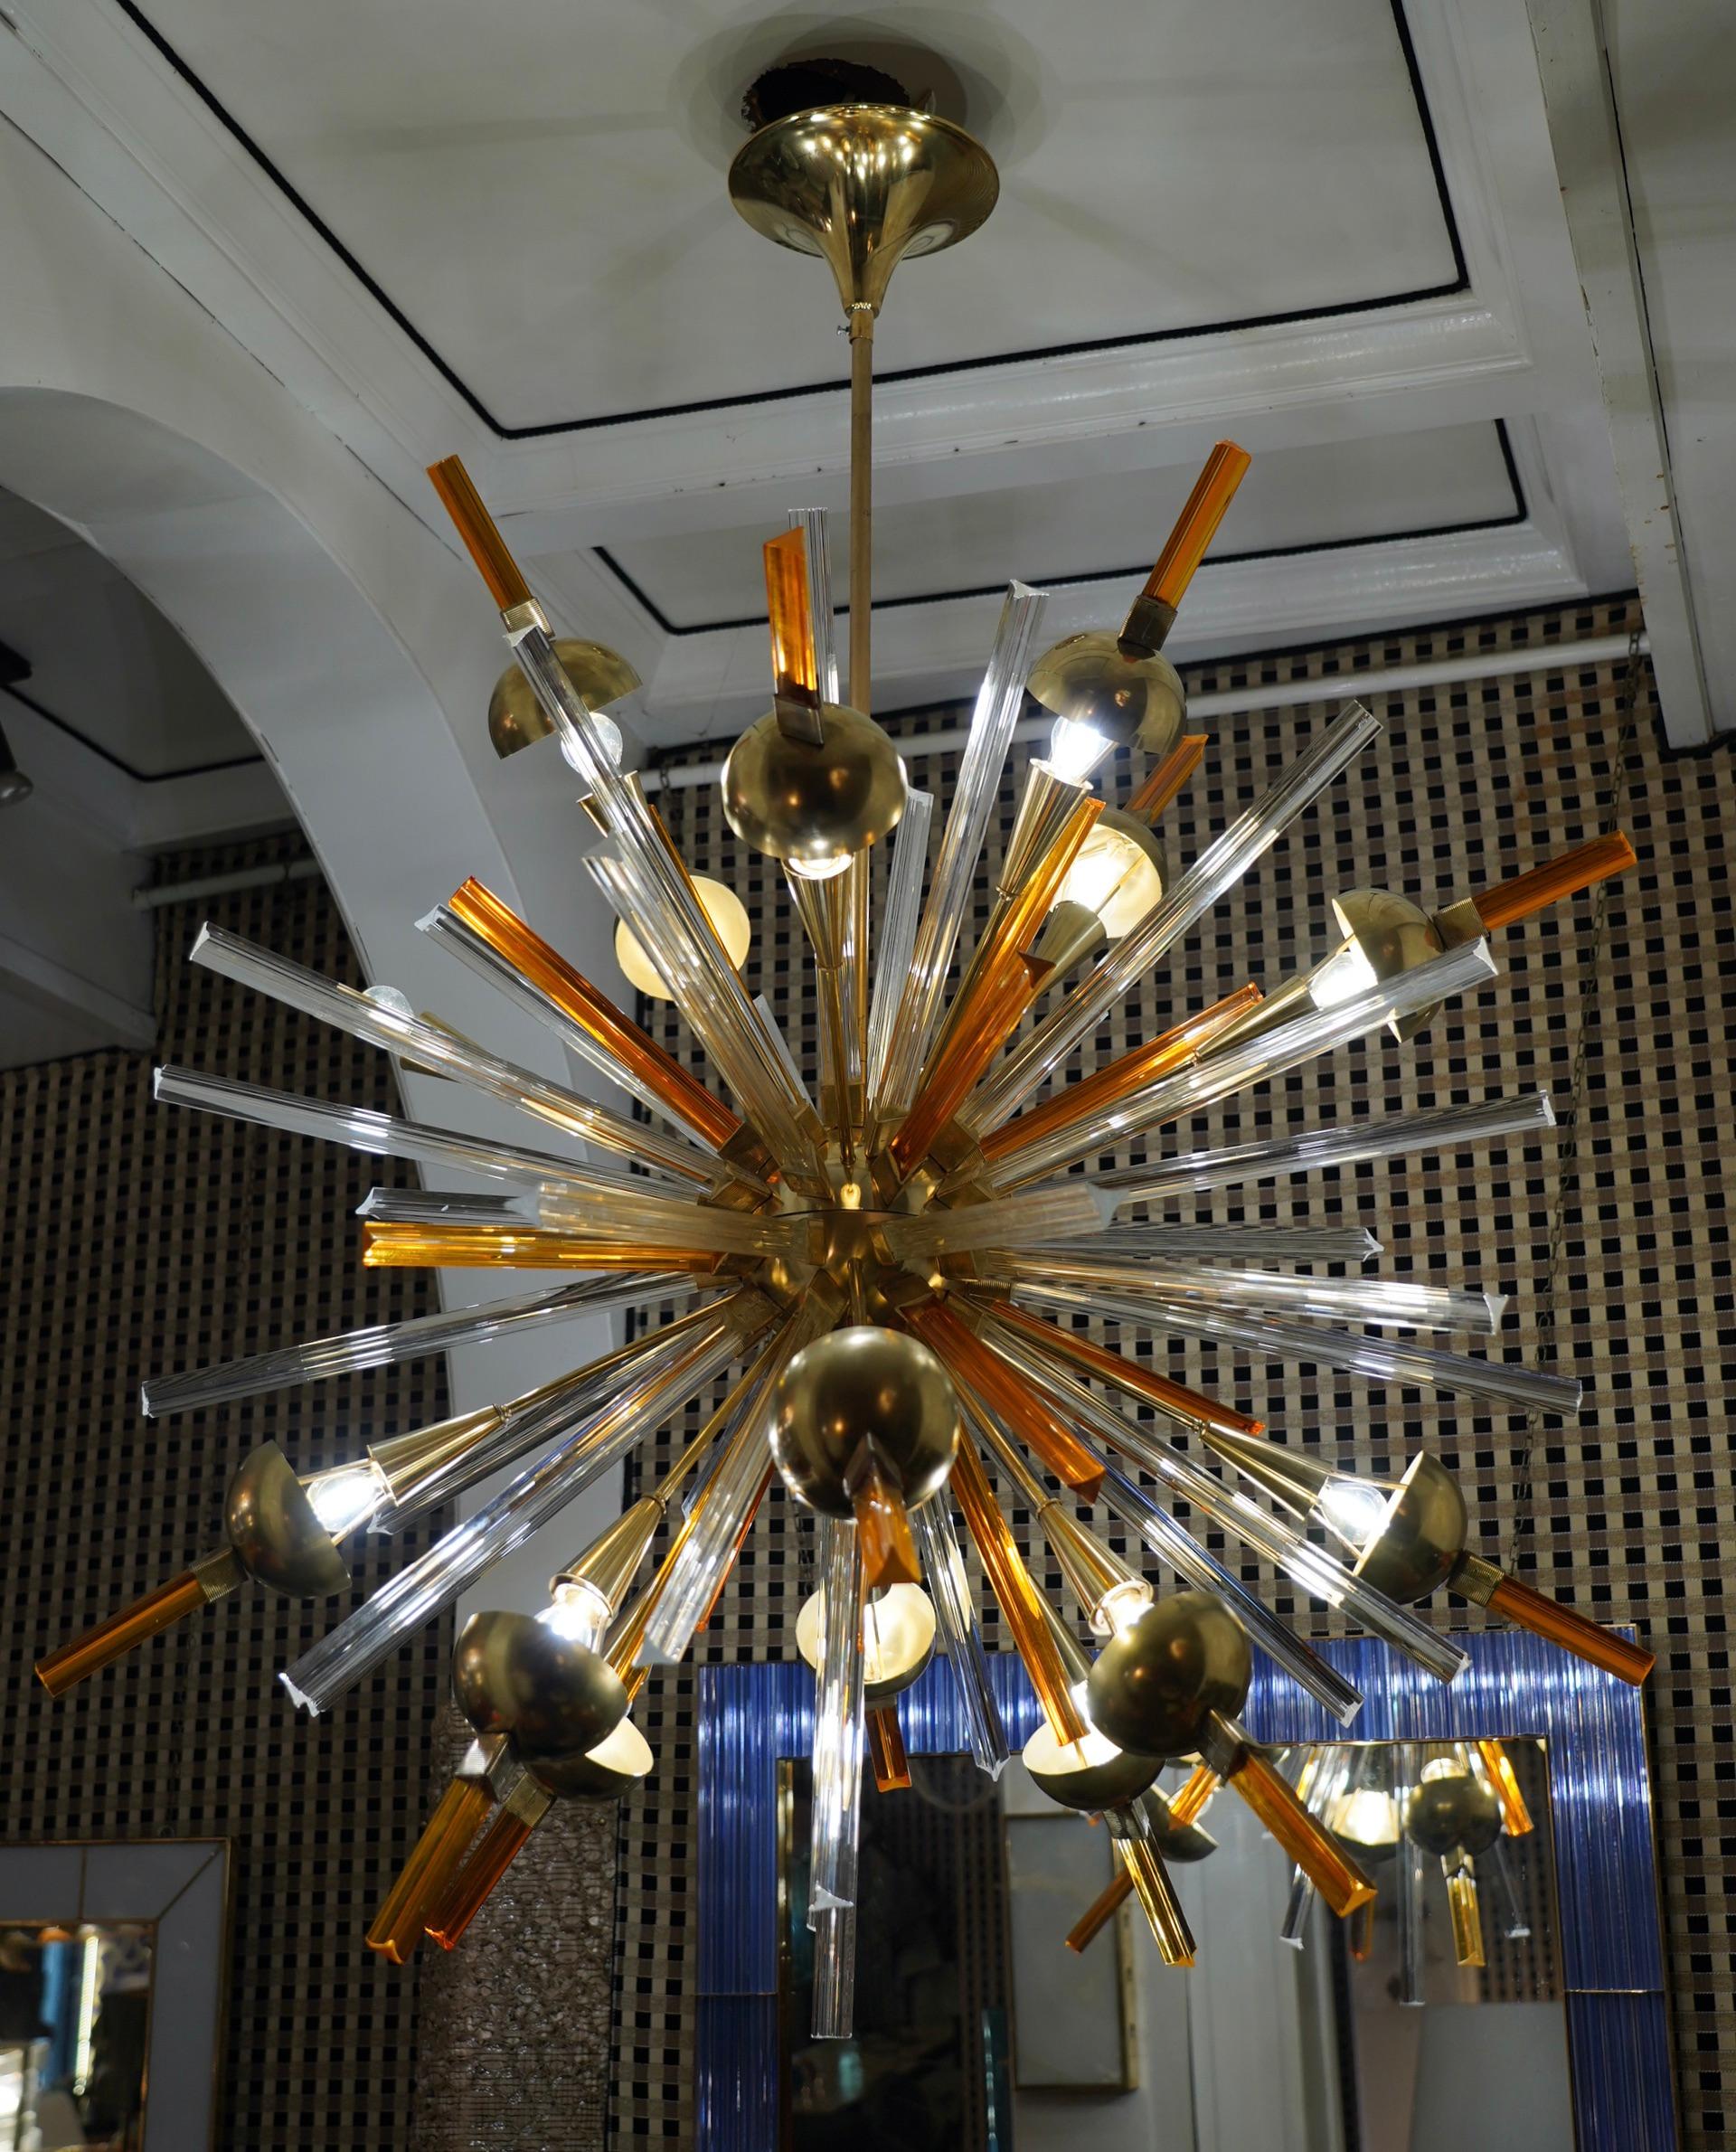 Something really incredible this Murano chandelier. Amazing design from the 1970s, due to its very particular shape of these long triangular rods. Very elegant, will furnish and decorate your whole room. The Murano furnaces create an indisputable